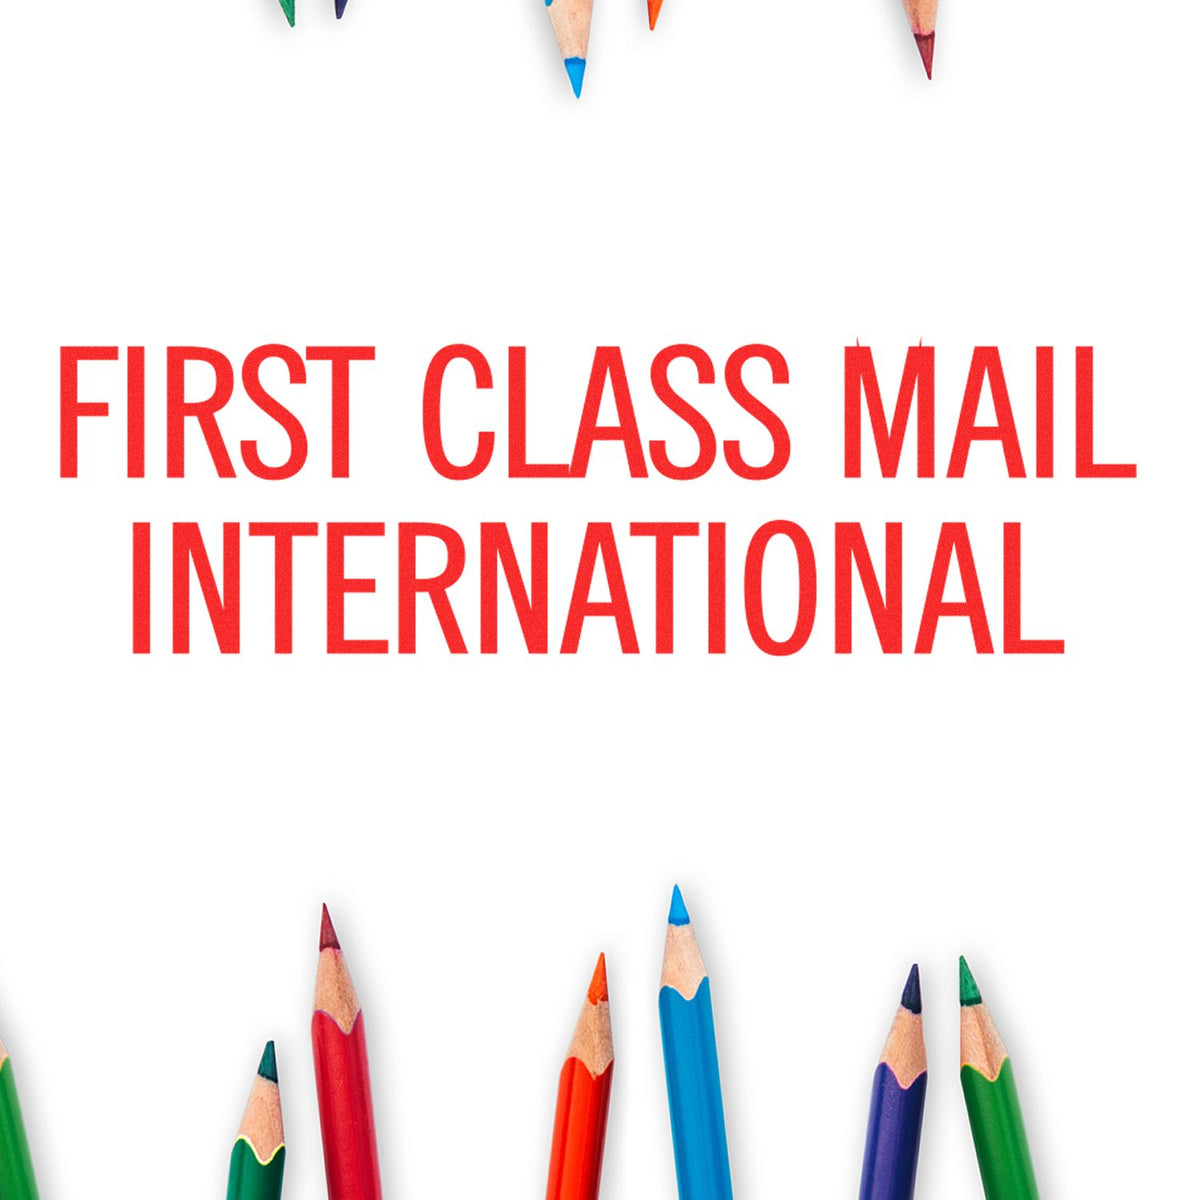 First Class Mail International Rubber Stamp In Use Photo